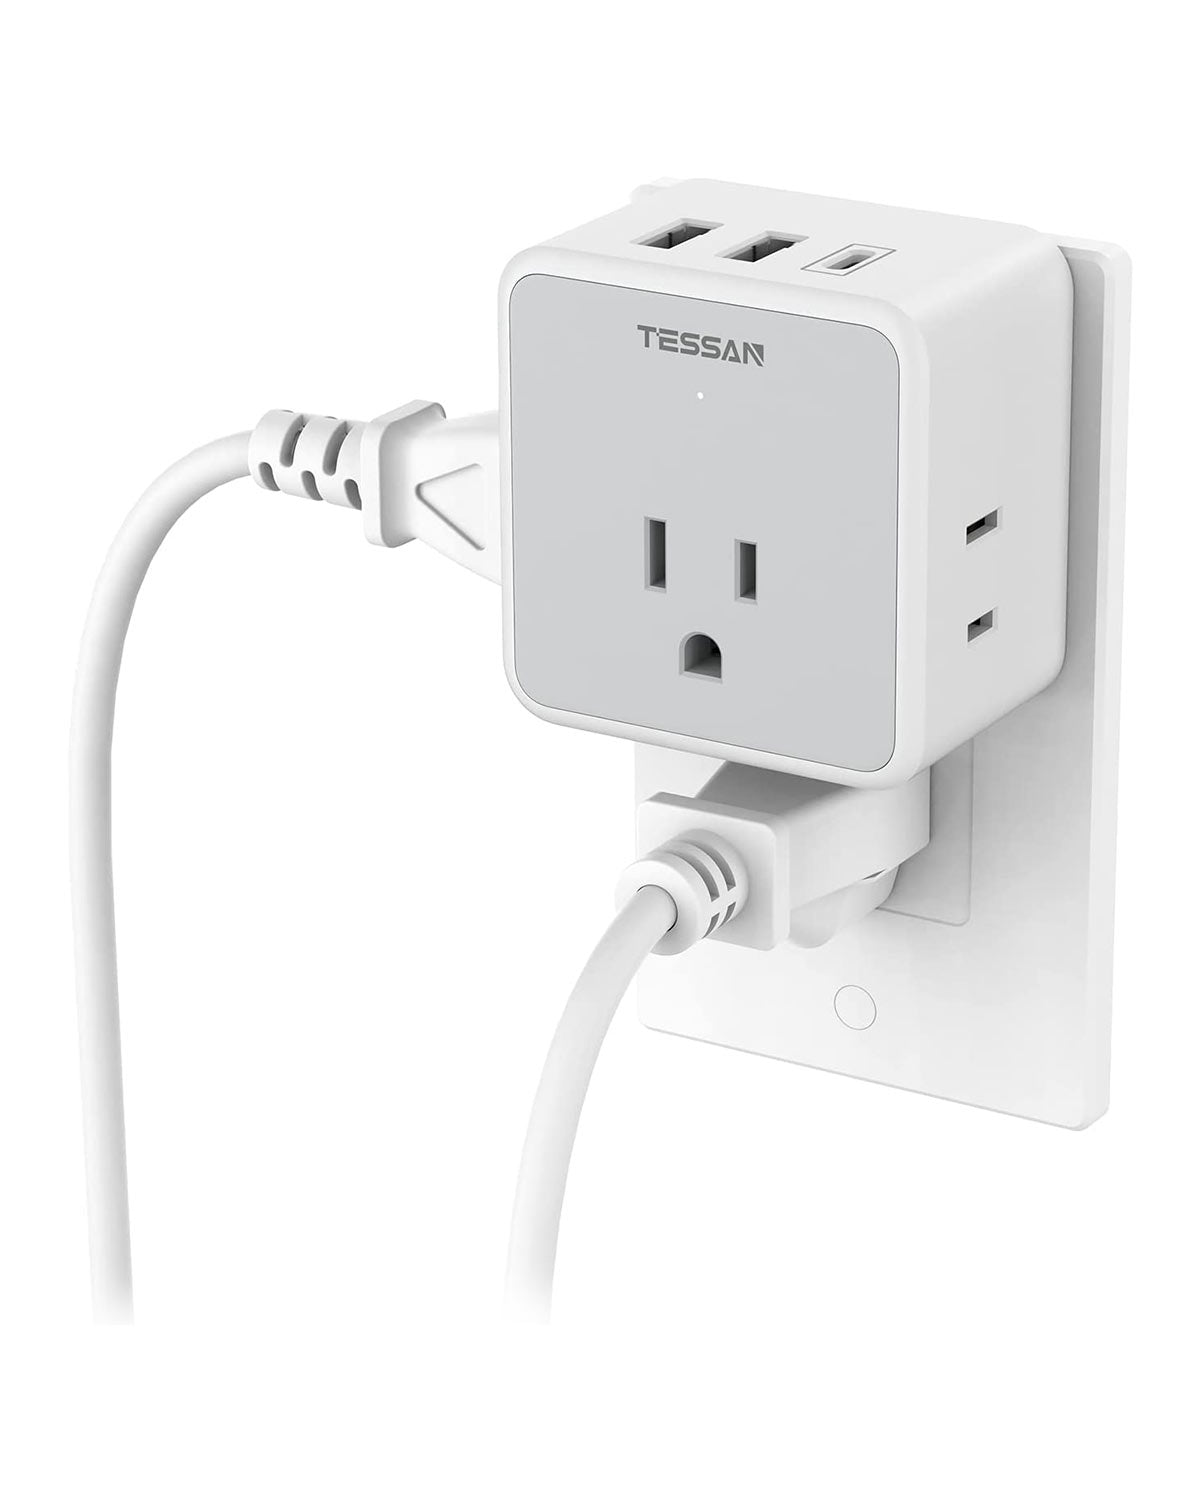 TESSAN 4 Electrical Outlet Extender with 3 USB Charging Ports (1 USB C)